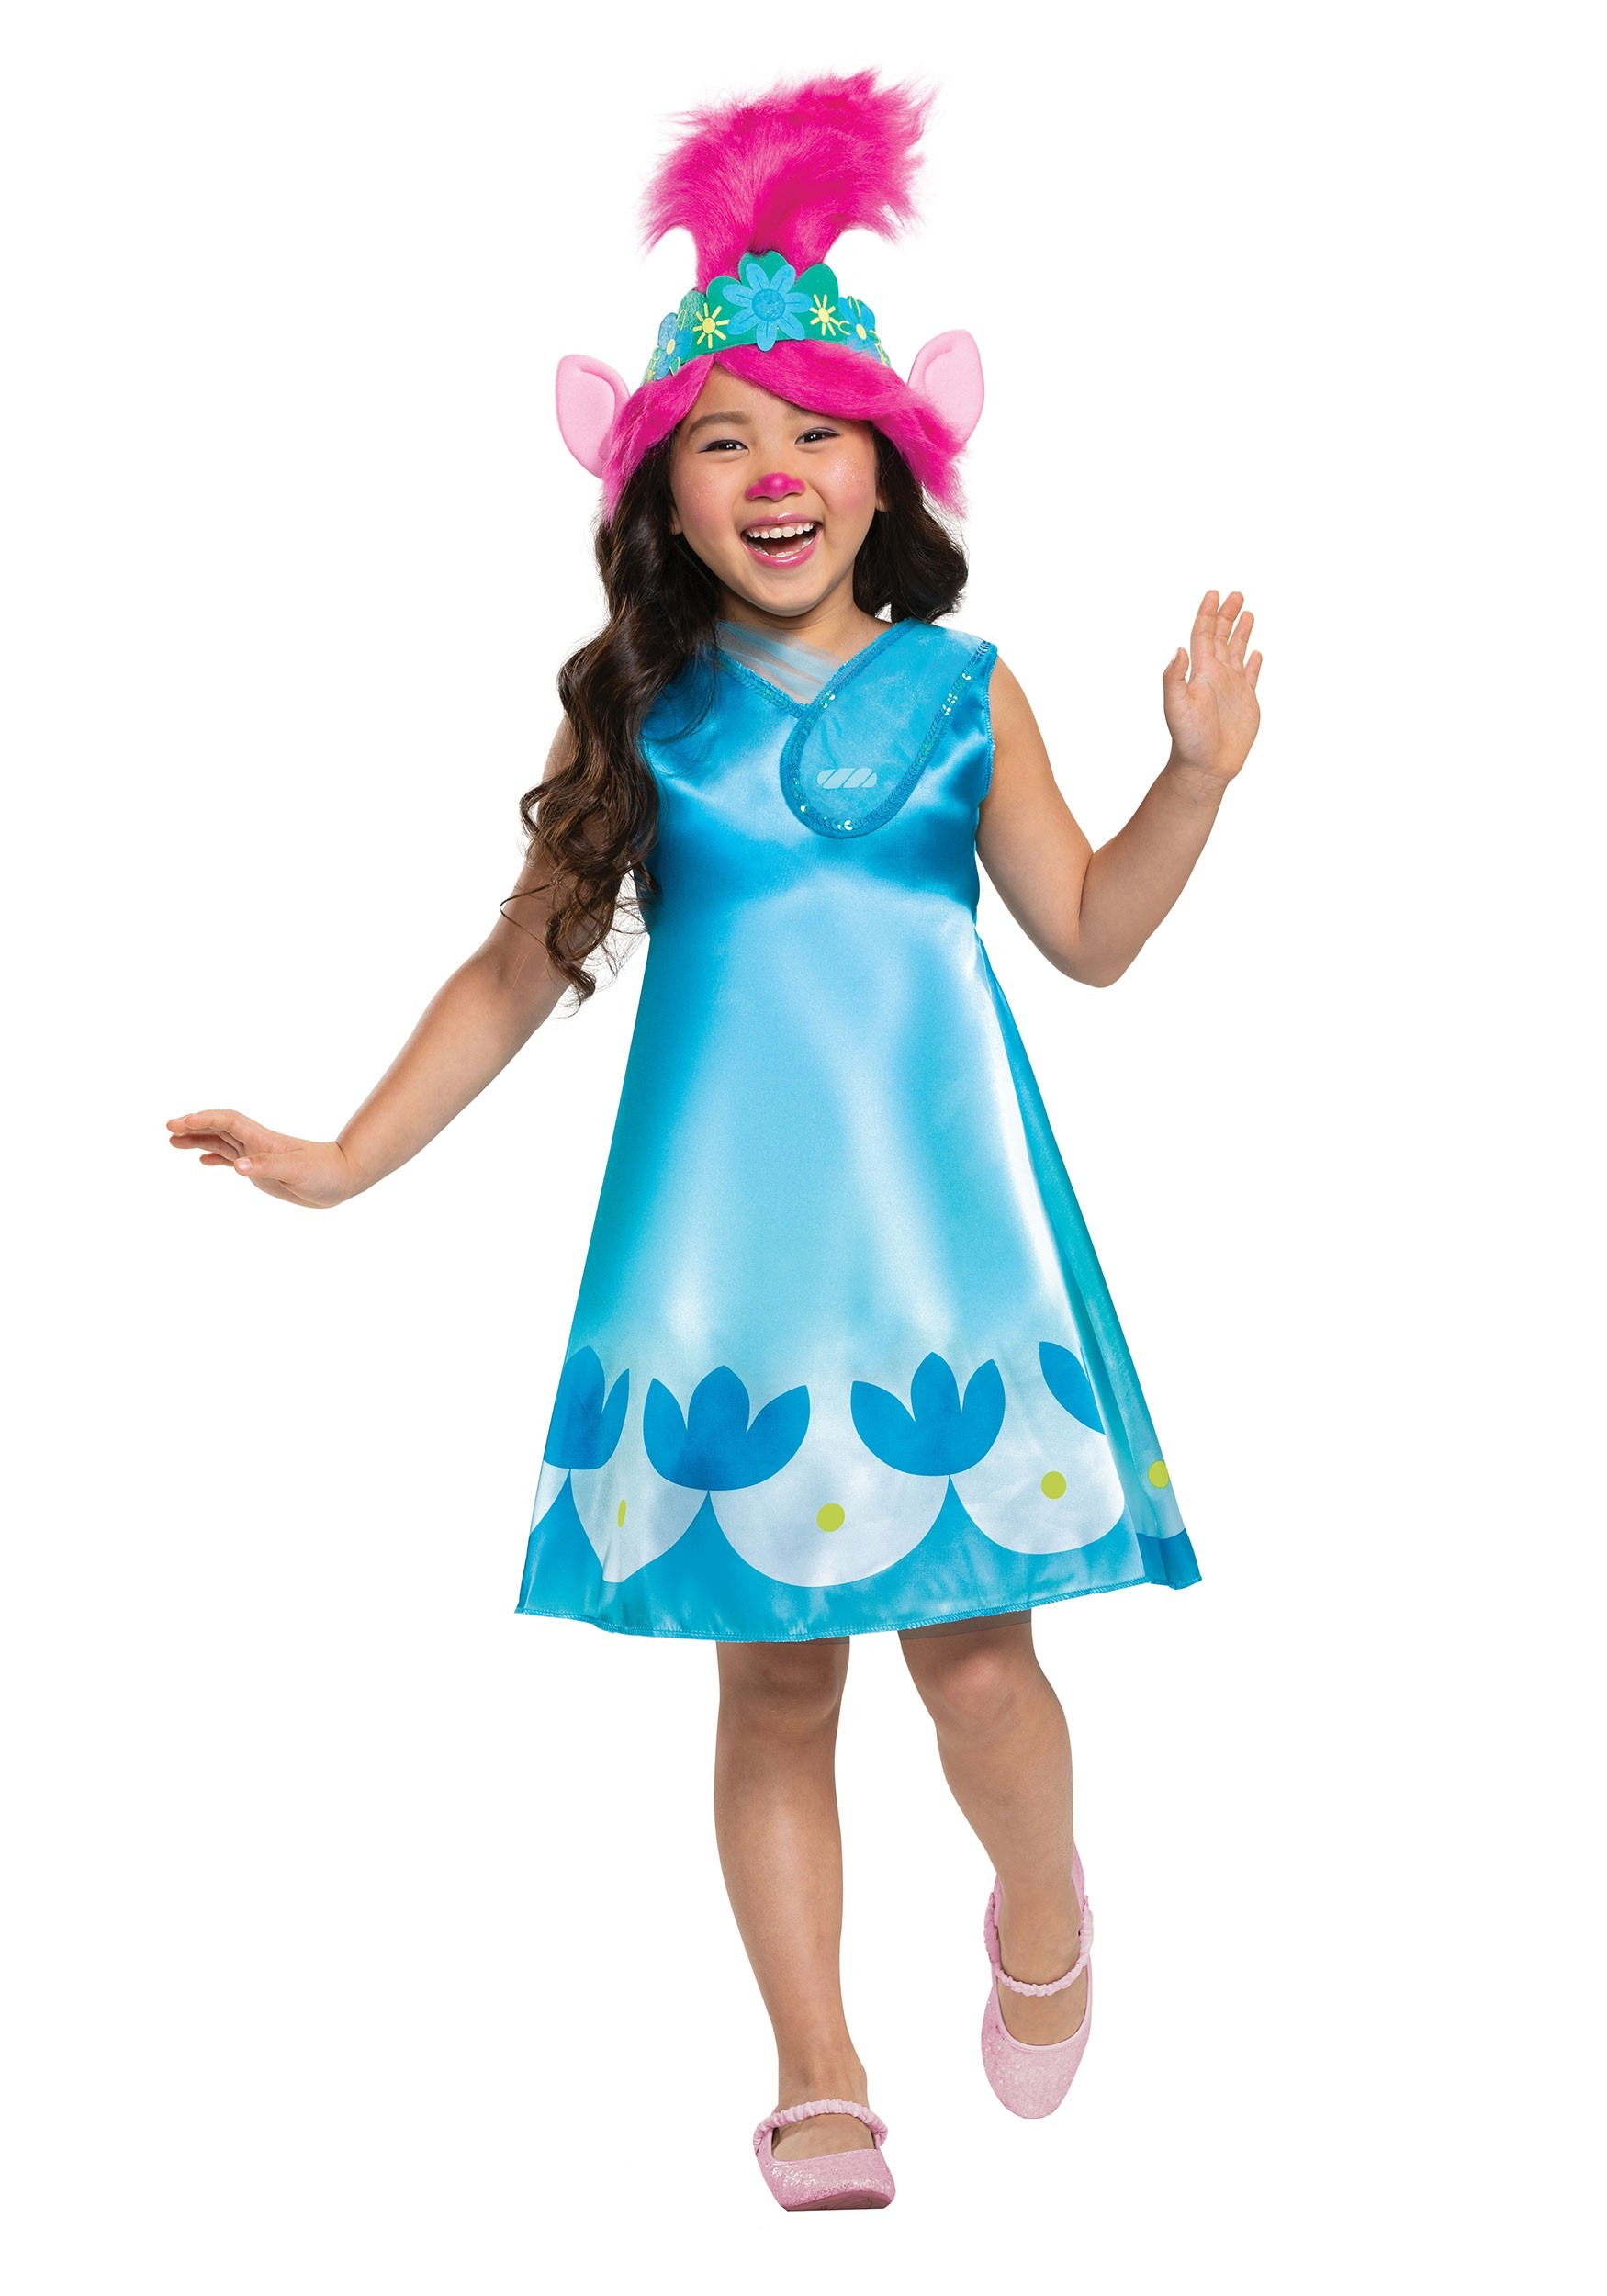 Photos - Fancy Dress Dreamworks Disguise Trolls World Tour Classic Poppy Costume for Girl's Pink/Blue 